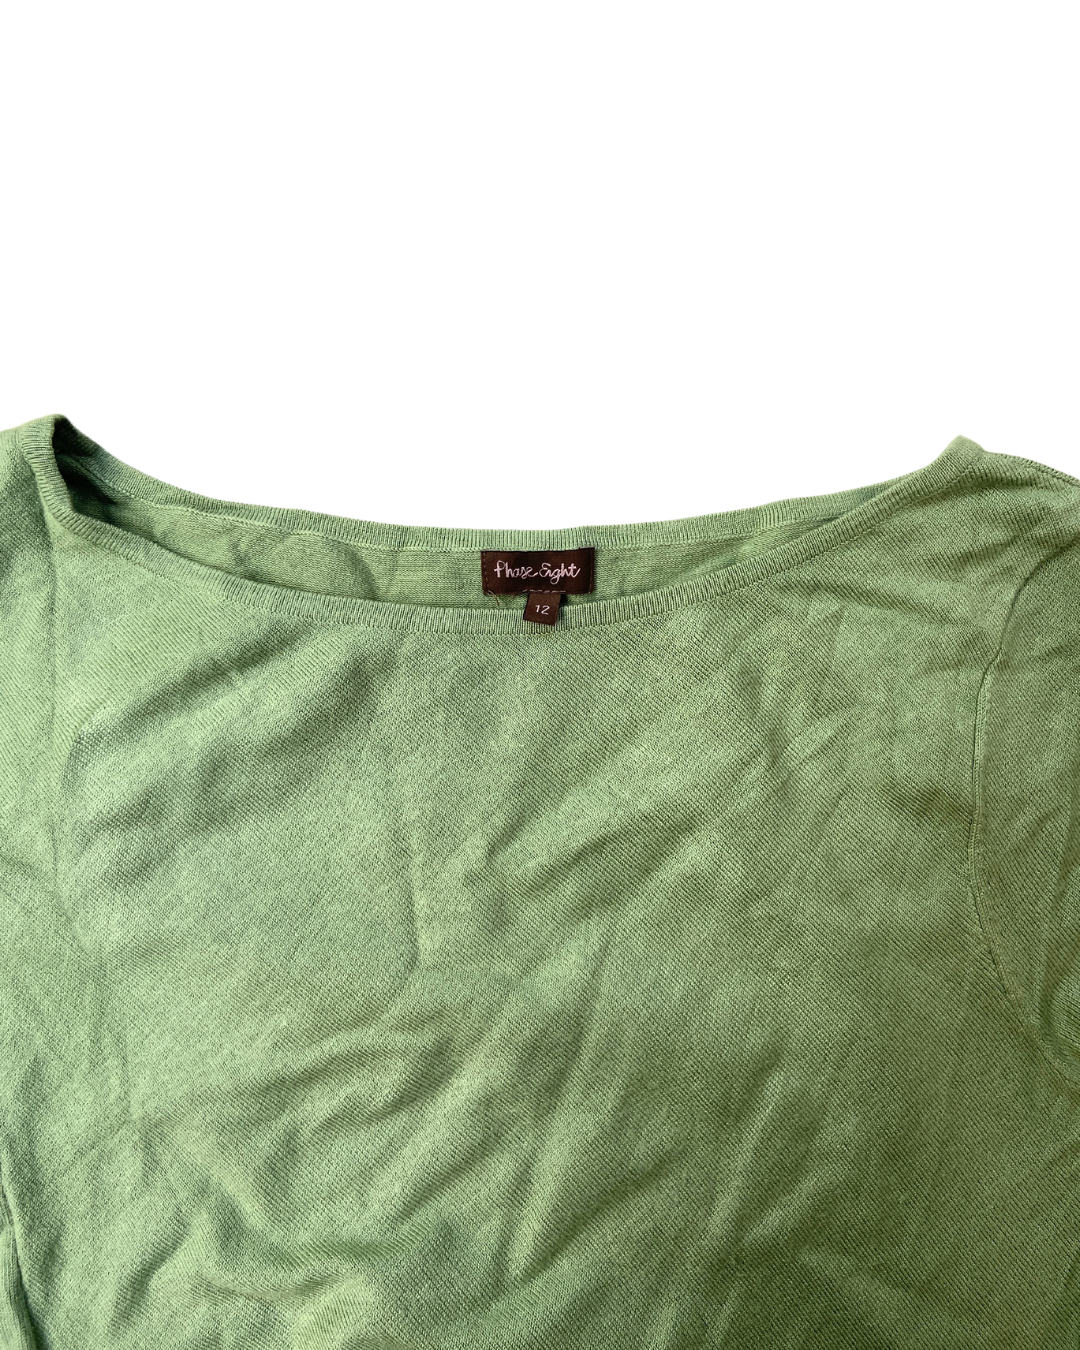 Phase Eight Olive Knit Top